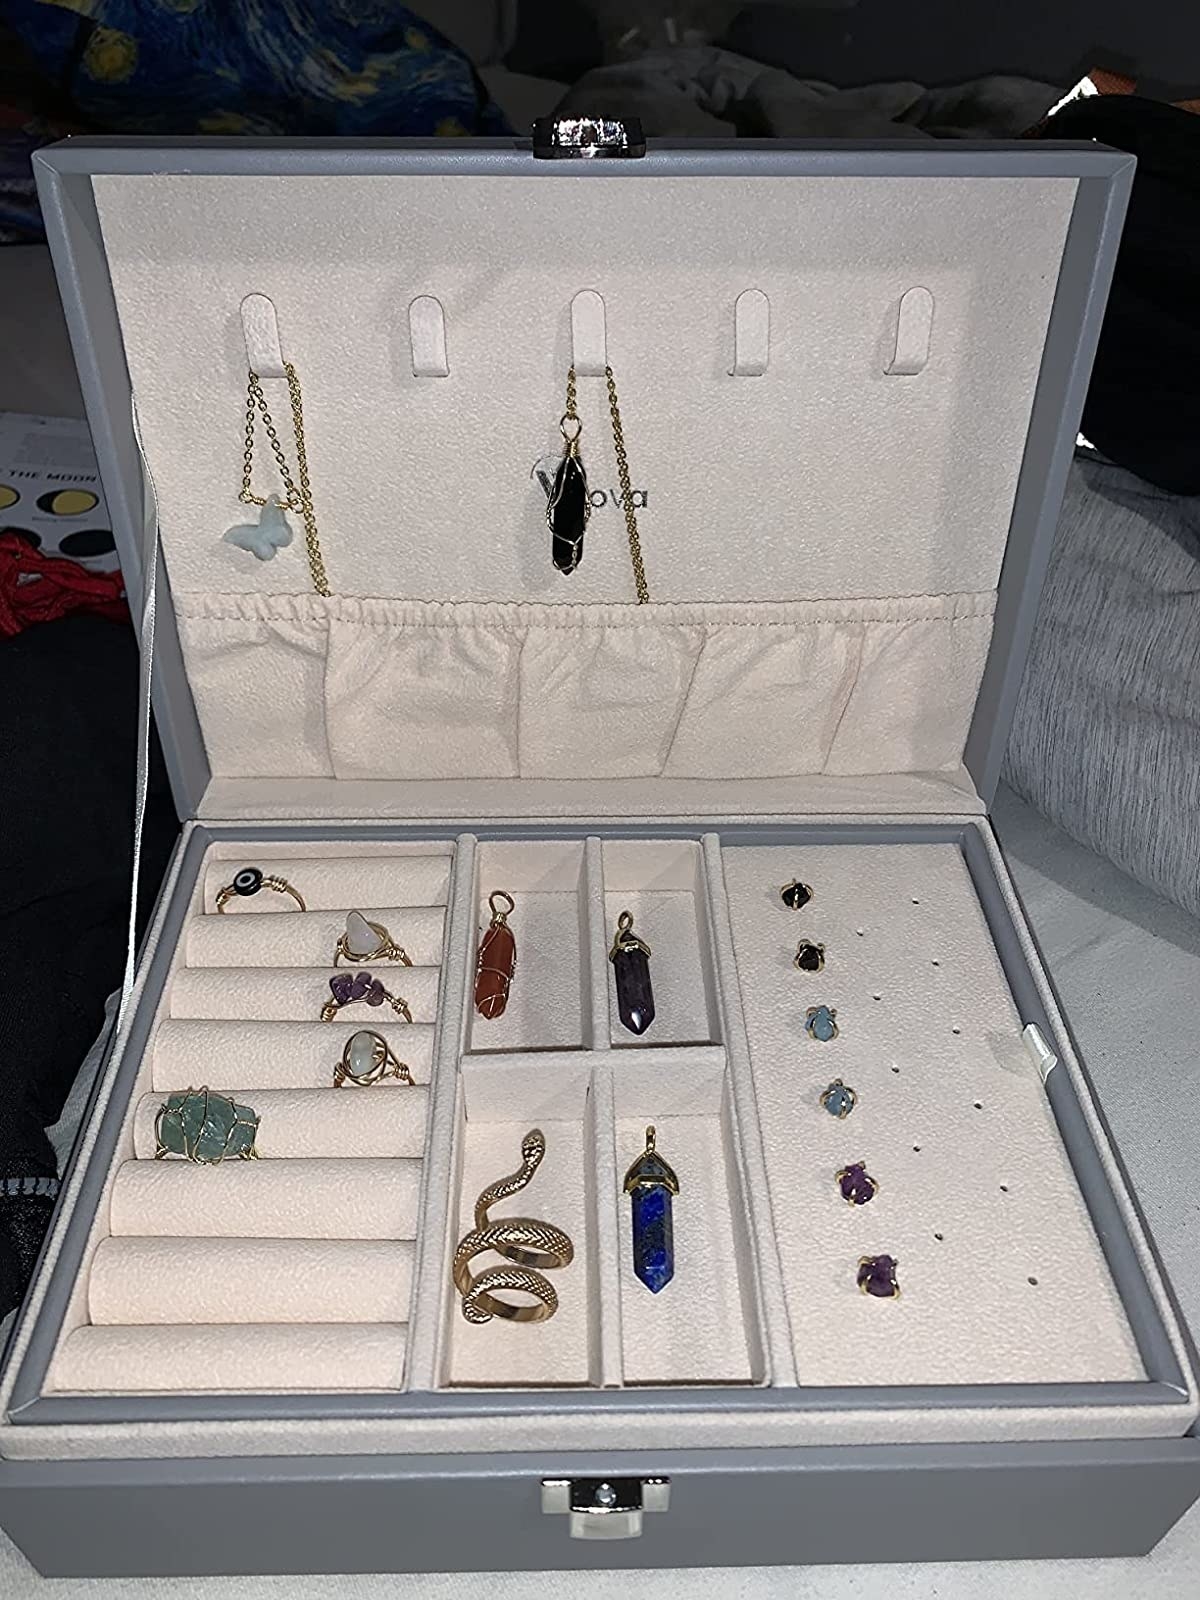 Reviewer image of organizer filled with jewelry